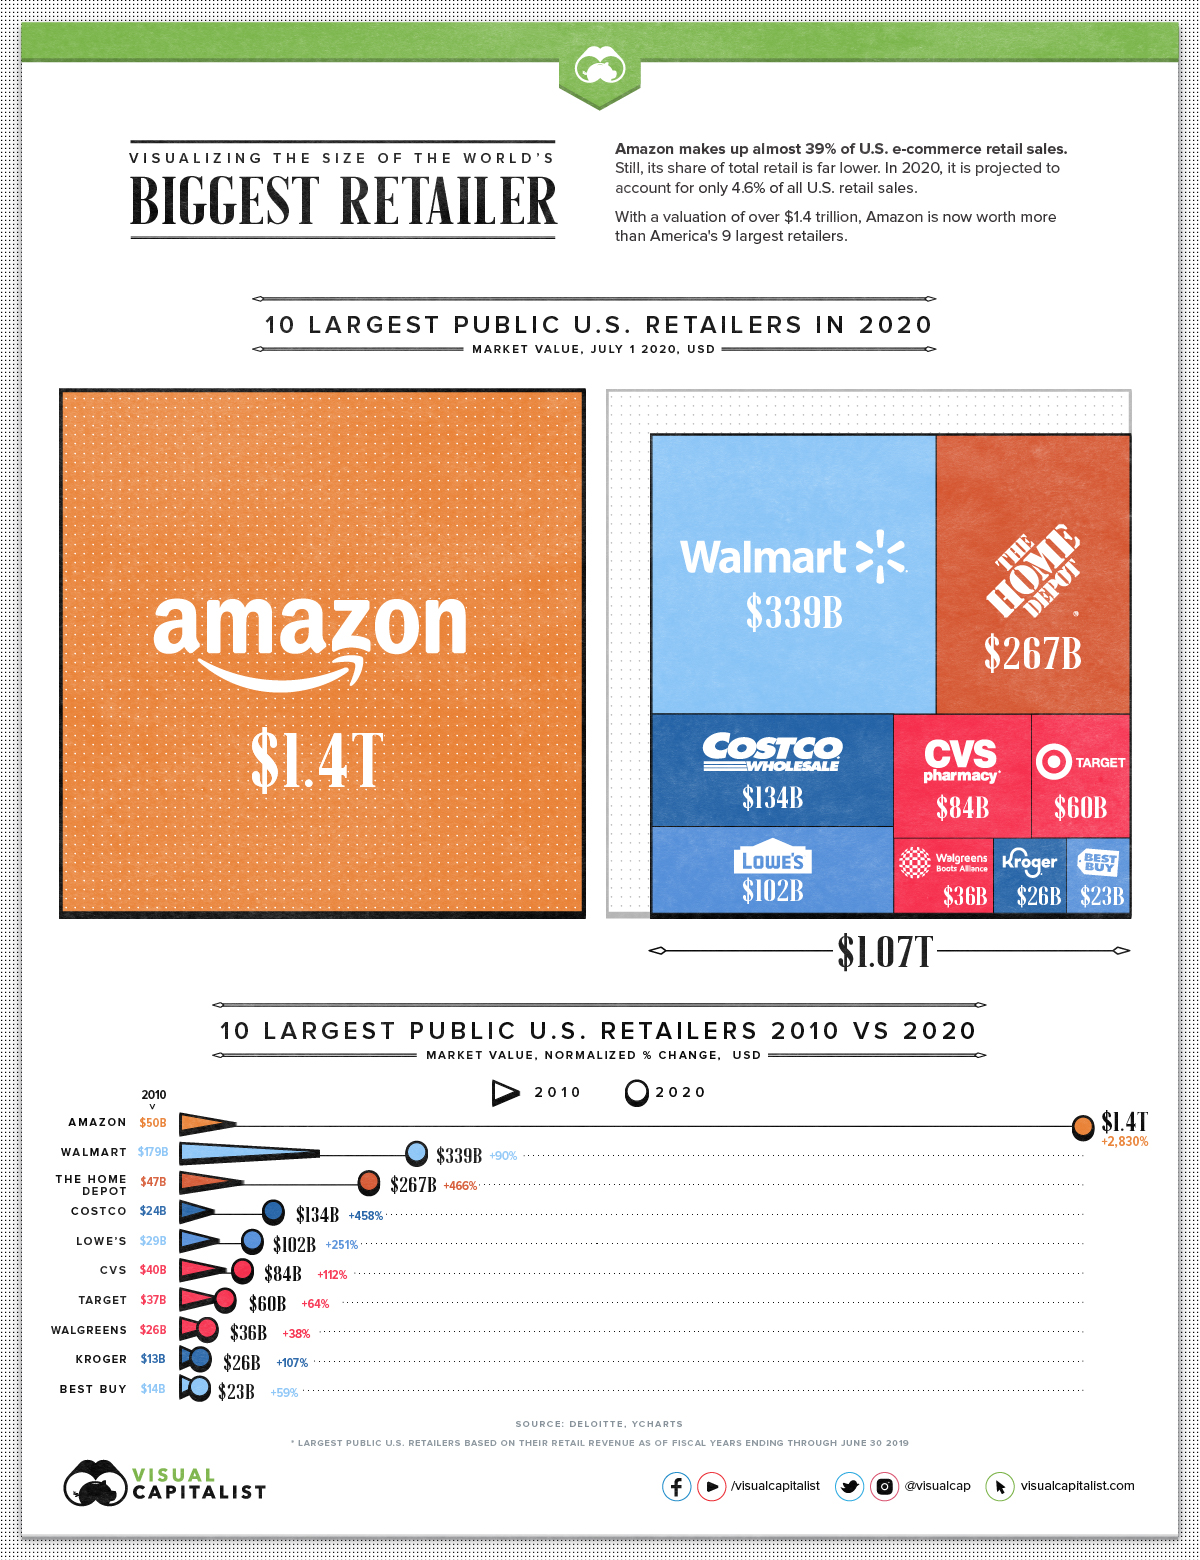 Amazon infographic compared to other retailers